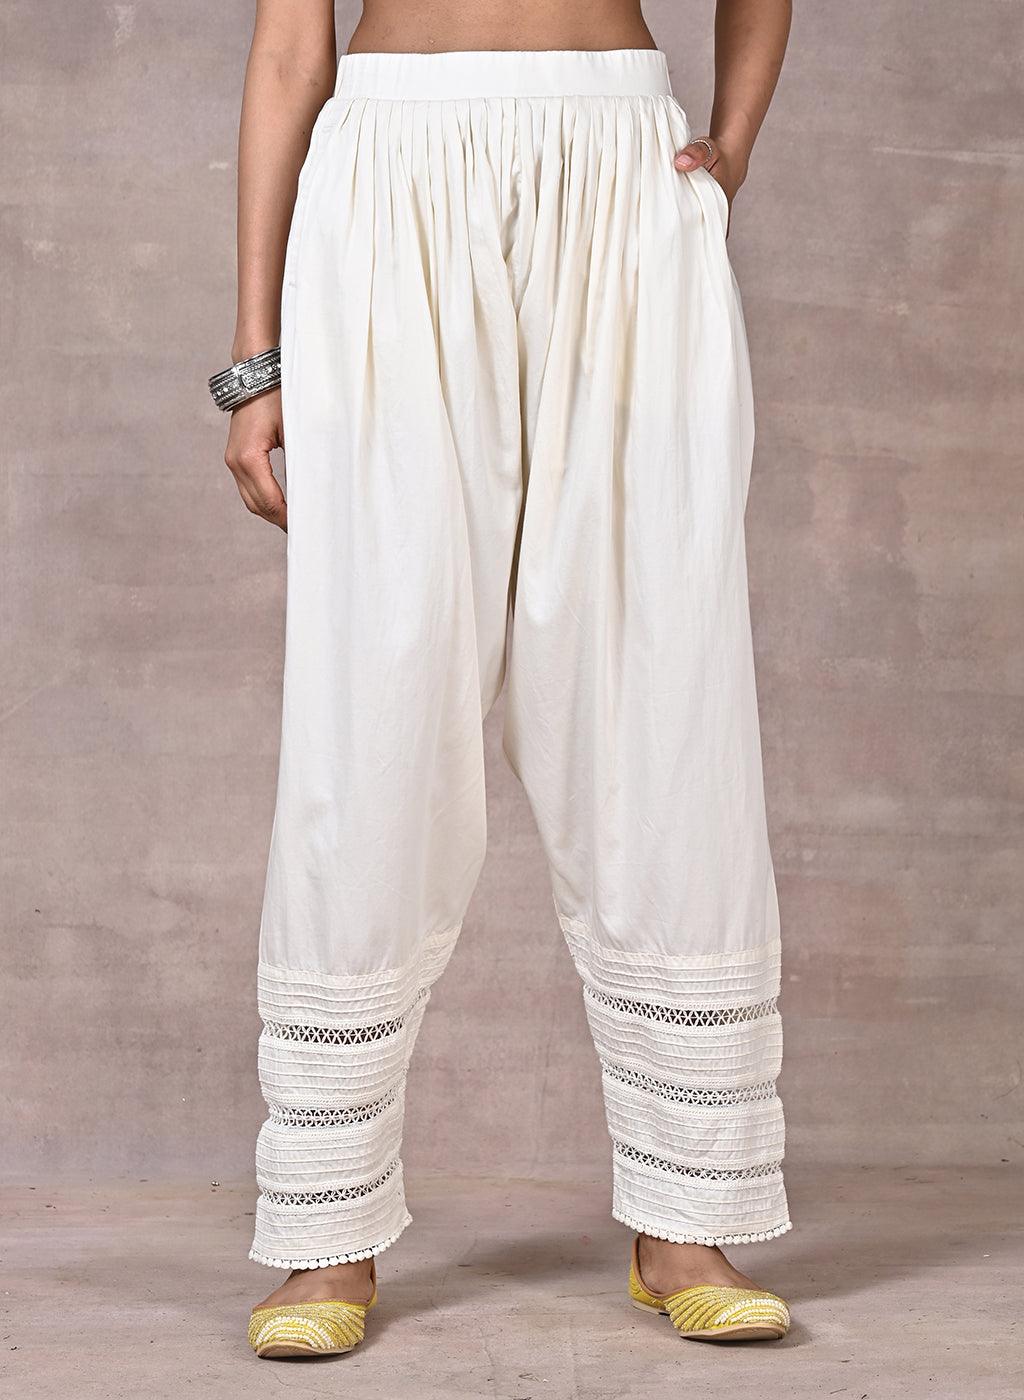 Ivory Ankle-length Pants for Women with drawstring Waist and Lace